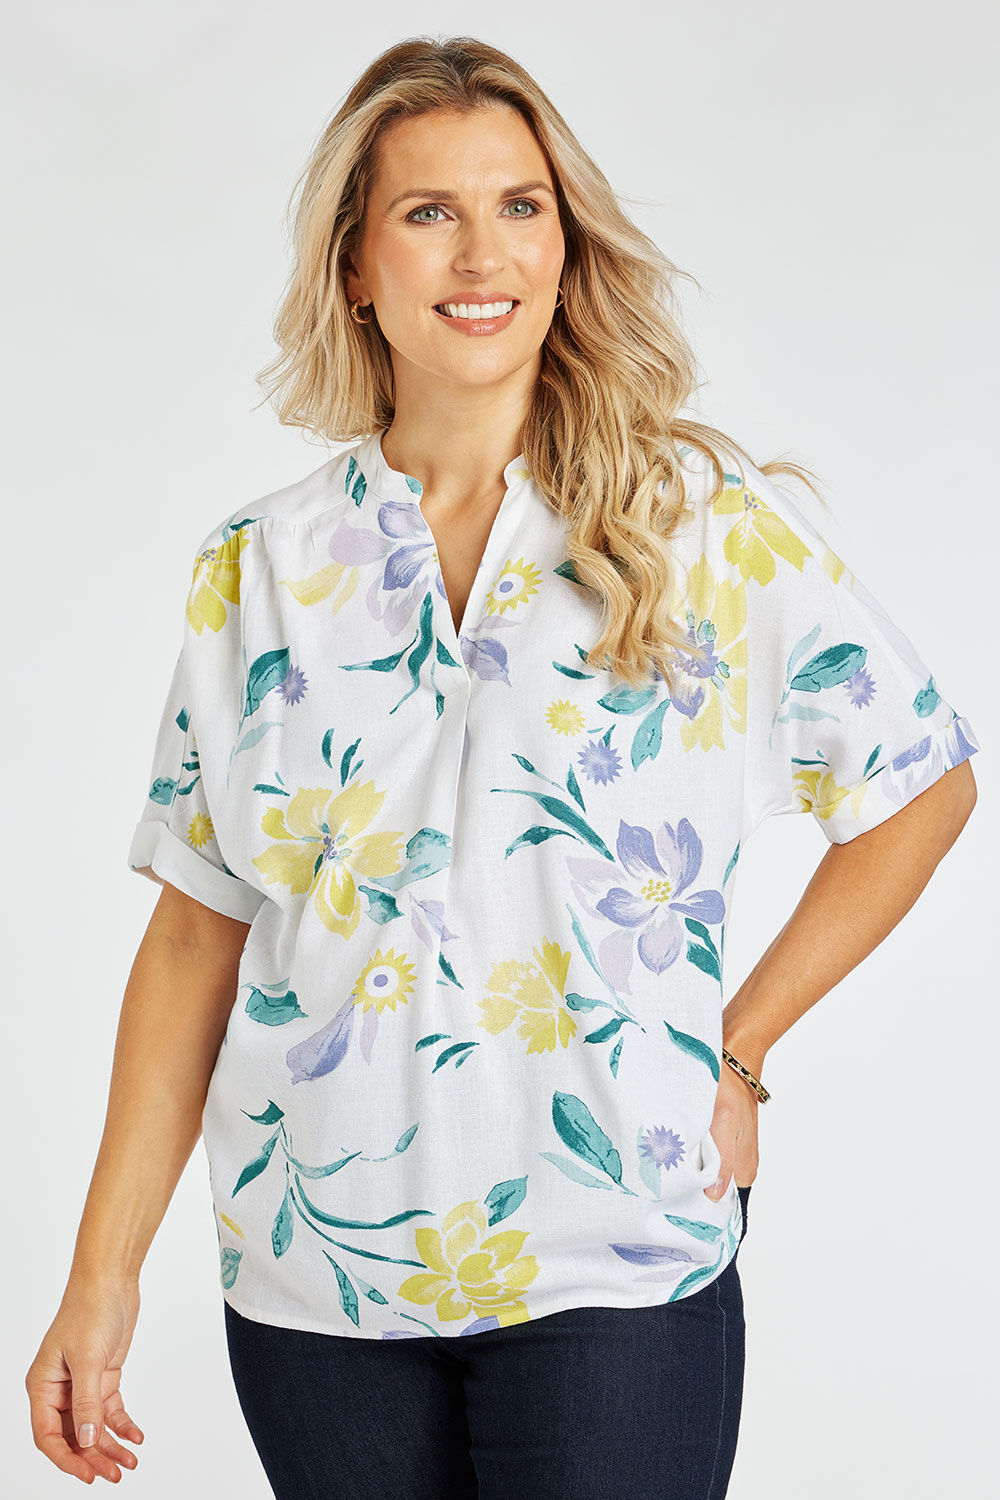 Bonmarche White/Green/Yellow Short Sleeve V Neck Inverted Pleat Floral Print Linen Top, Size: 14